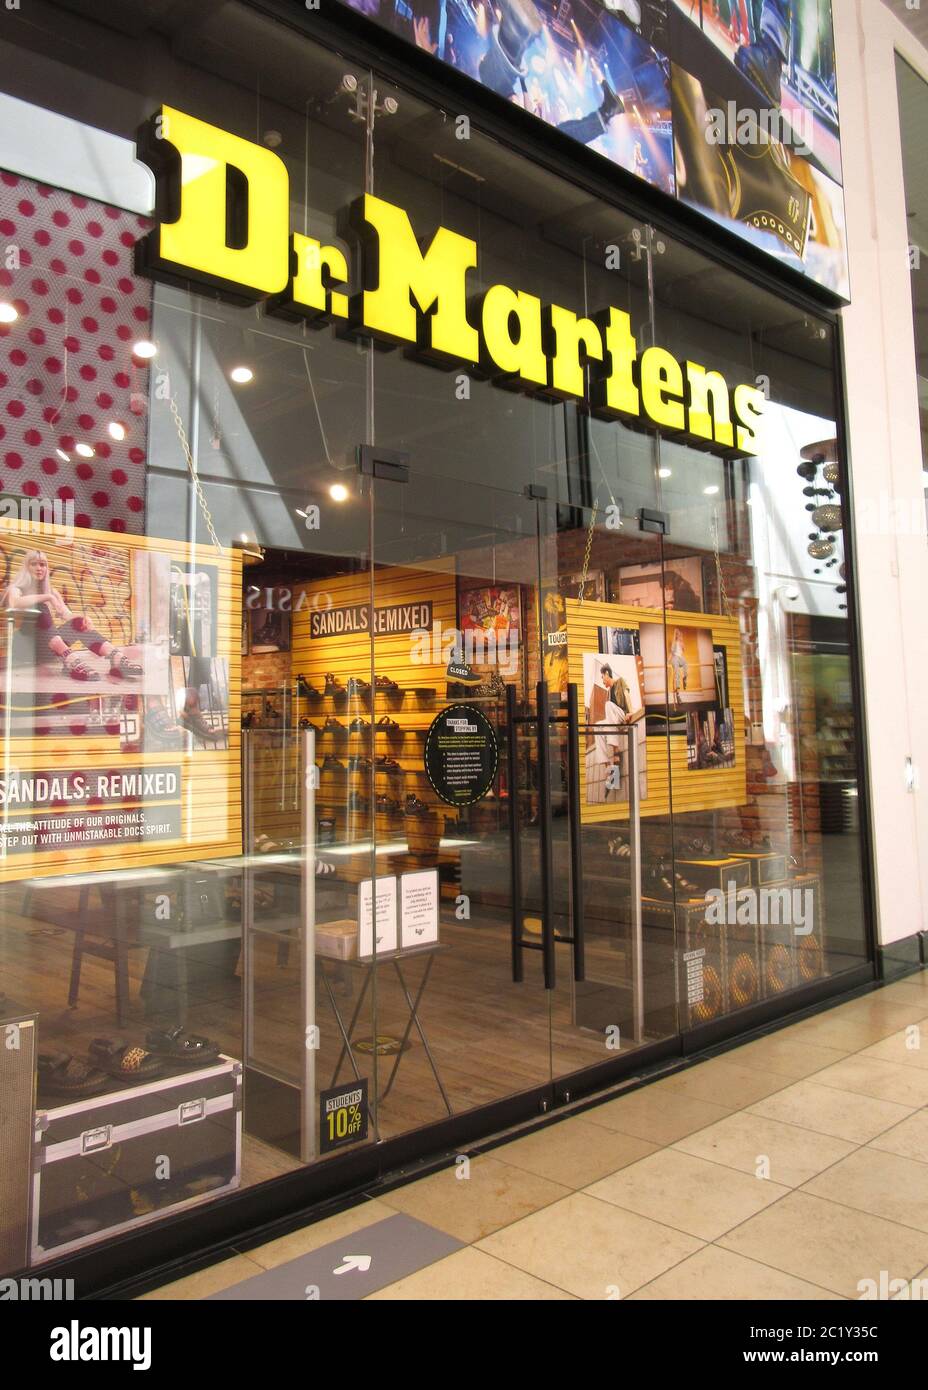 Dr martens store hi-res stock photography and images - Alamy